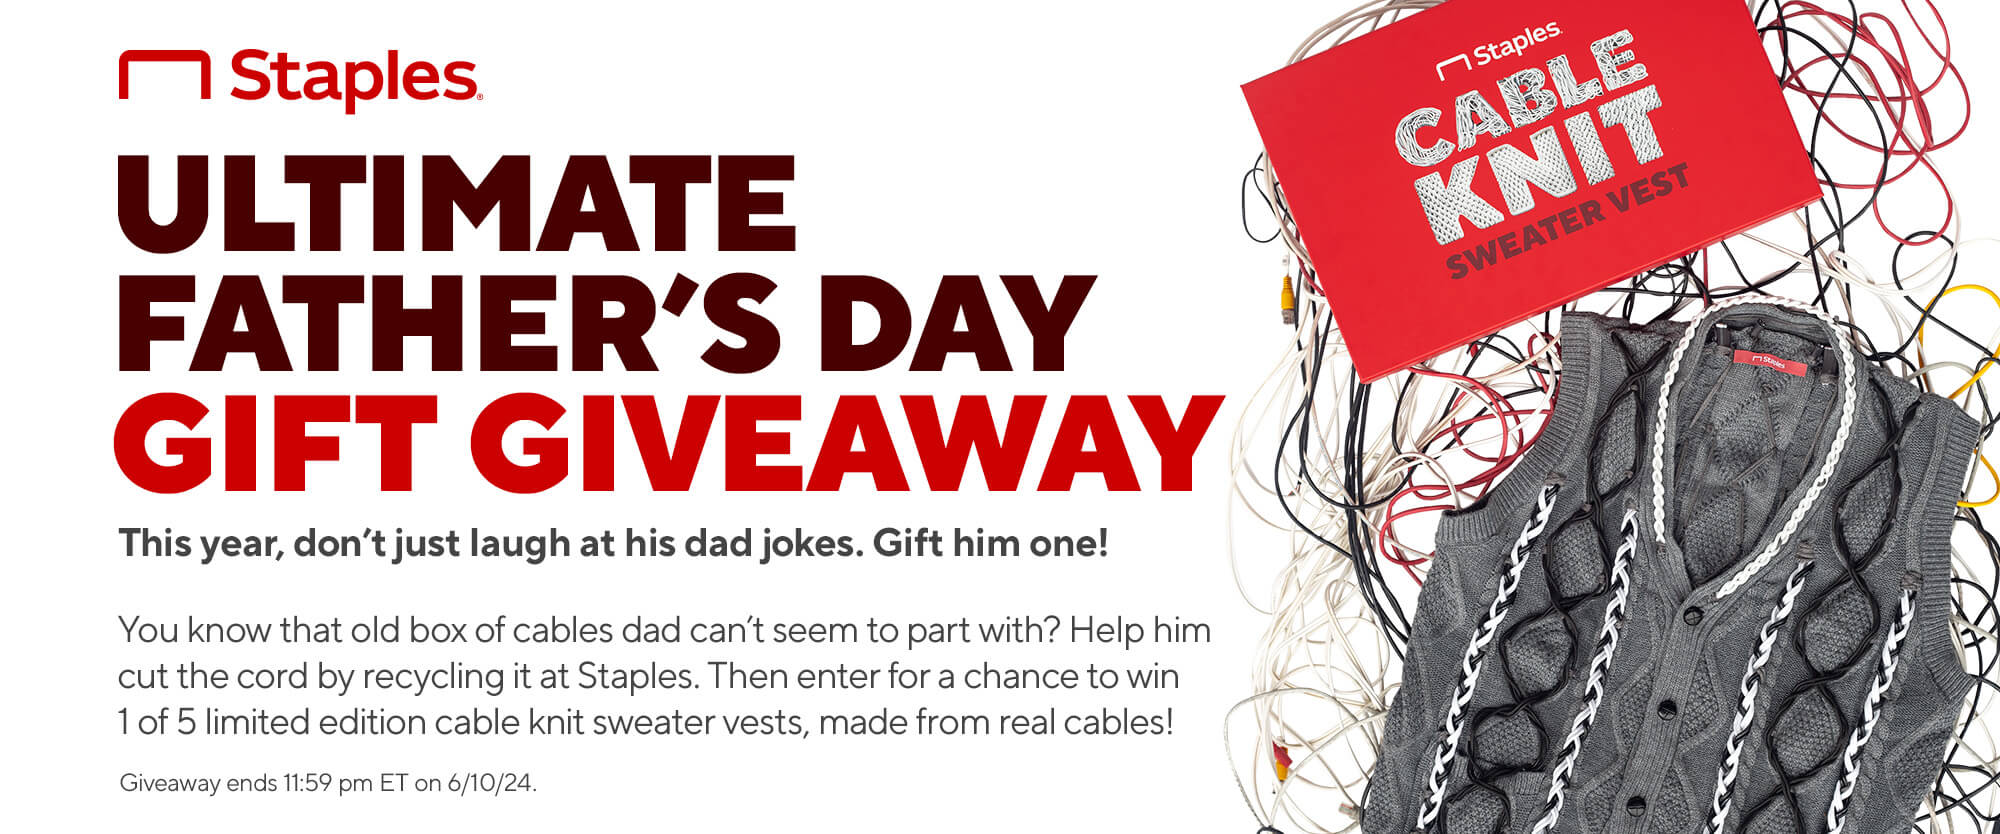 Staples Ultimate Father's Day Gift Giveaway (purchase or AMOE)  6-10-24